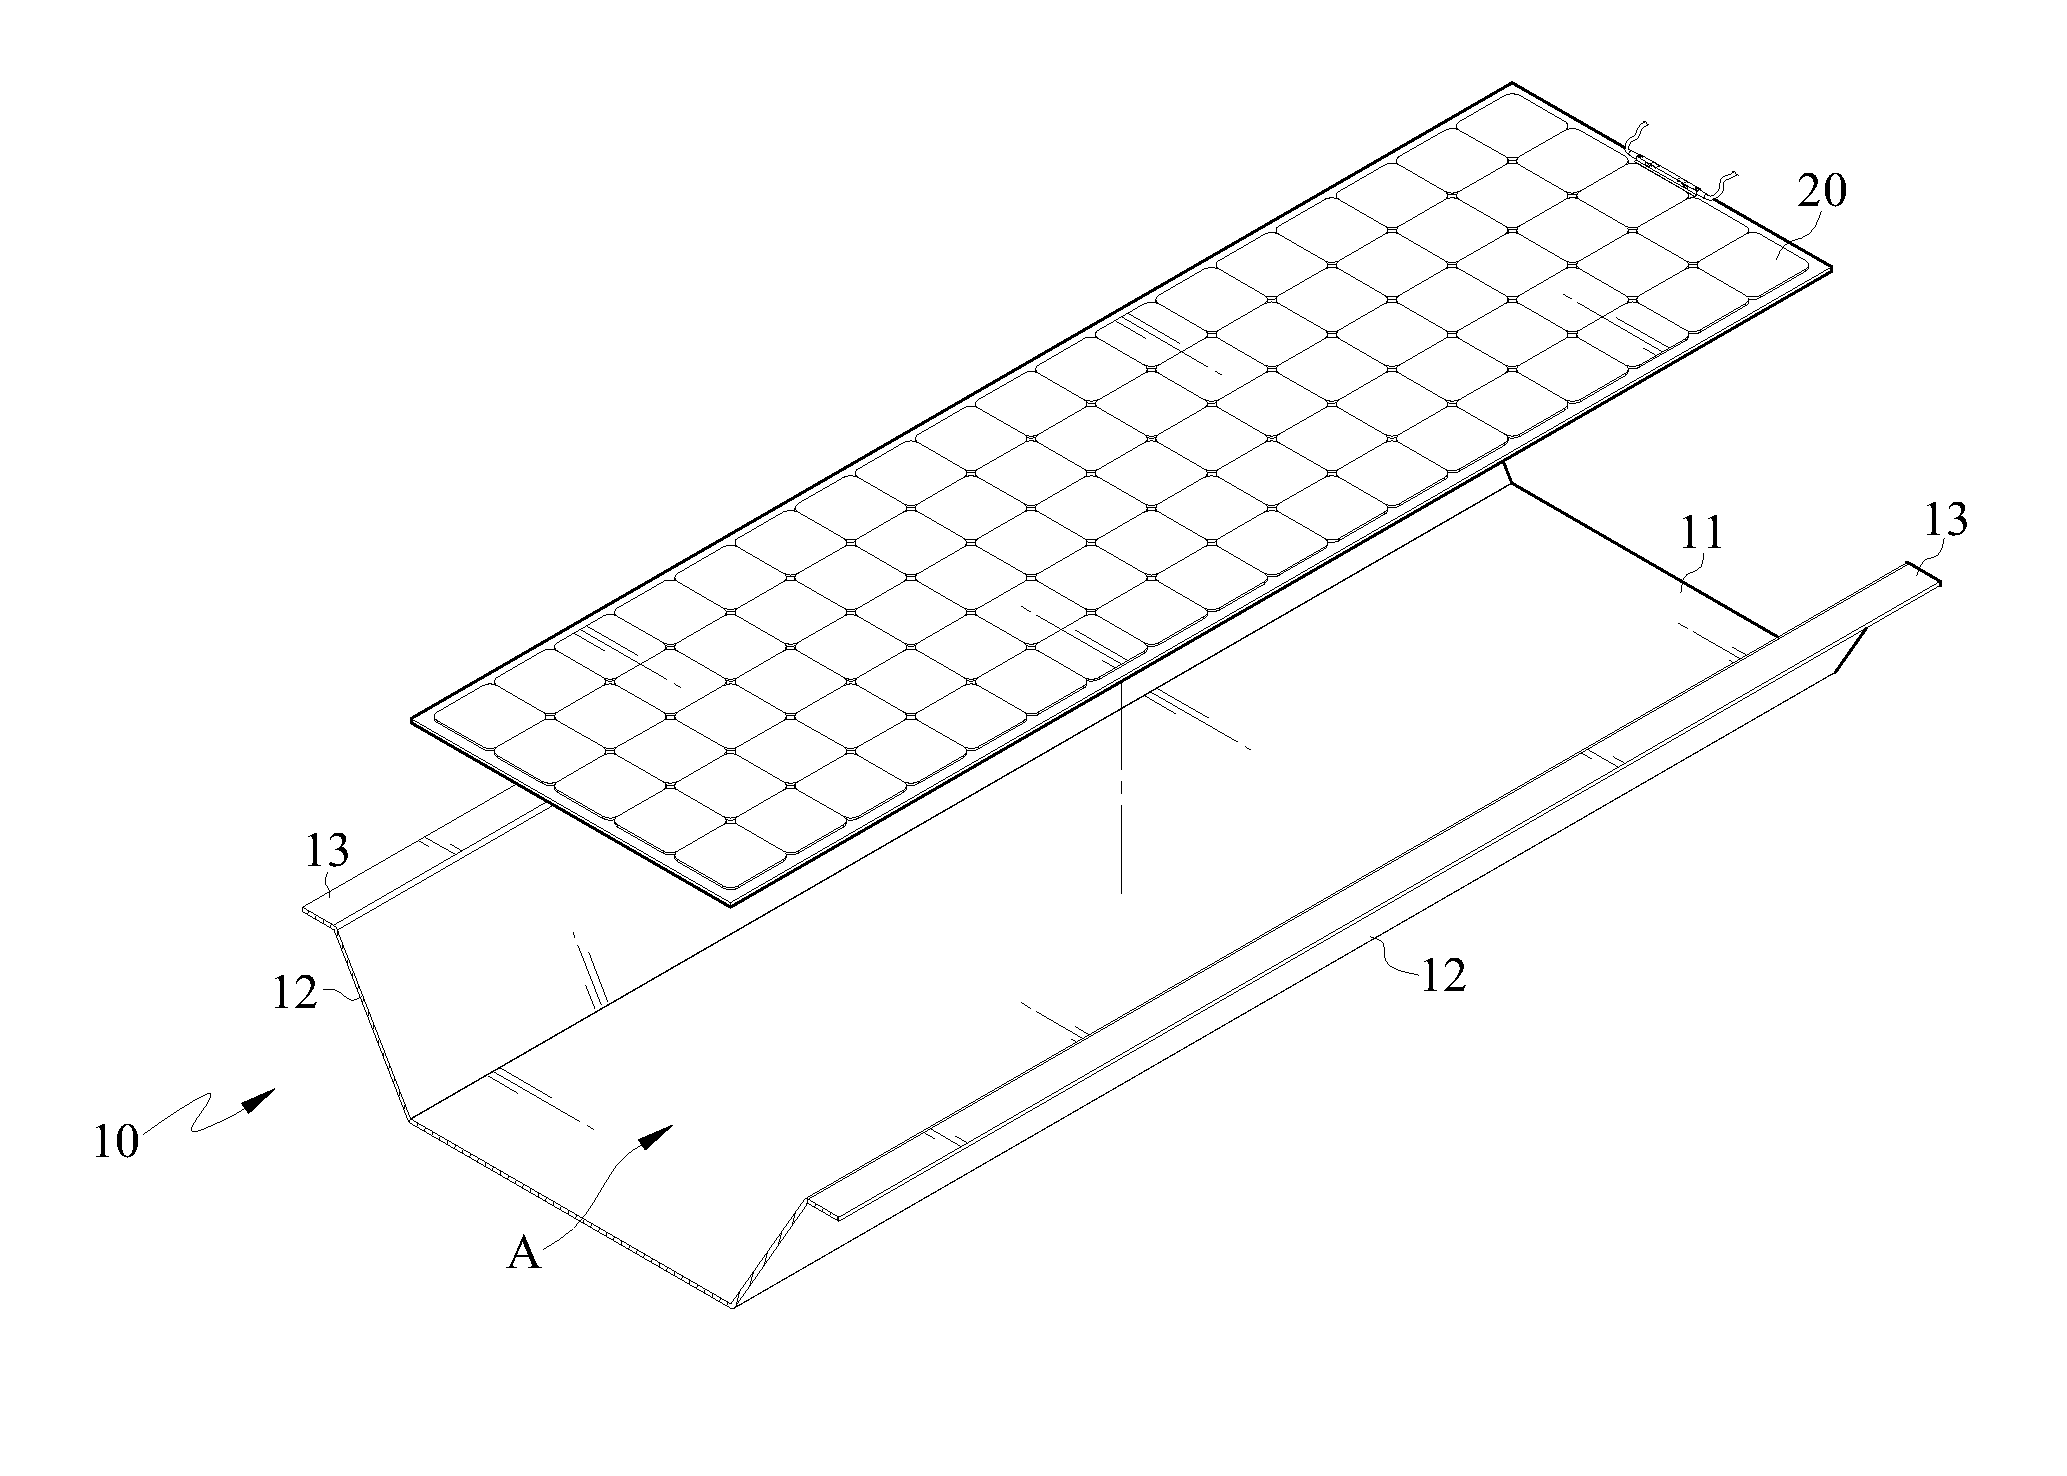 Corrugated plate structure having solar panel